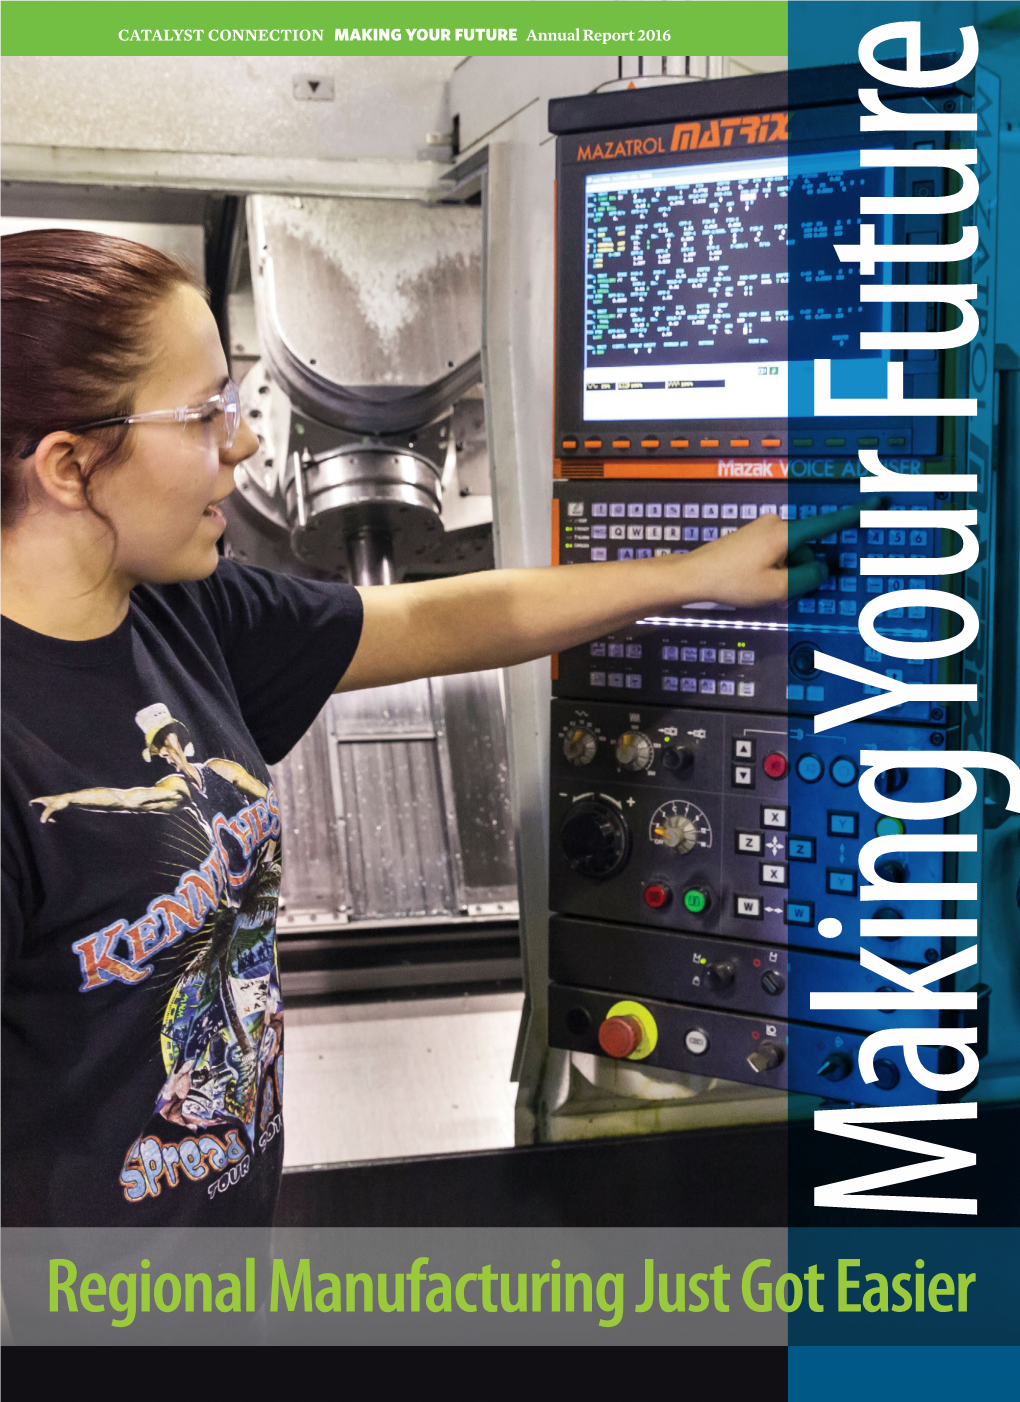 Regional Manufacturing Just Got Easier CATALYST CONNECTION MAKING YOUR FUTURE Annual Report 2016